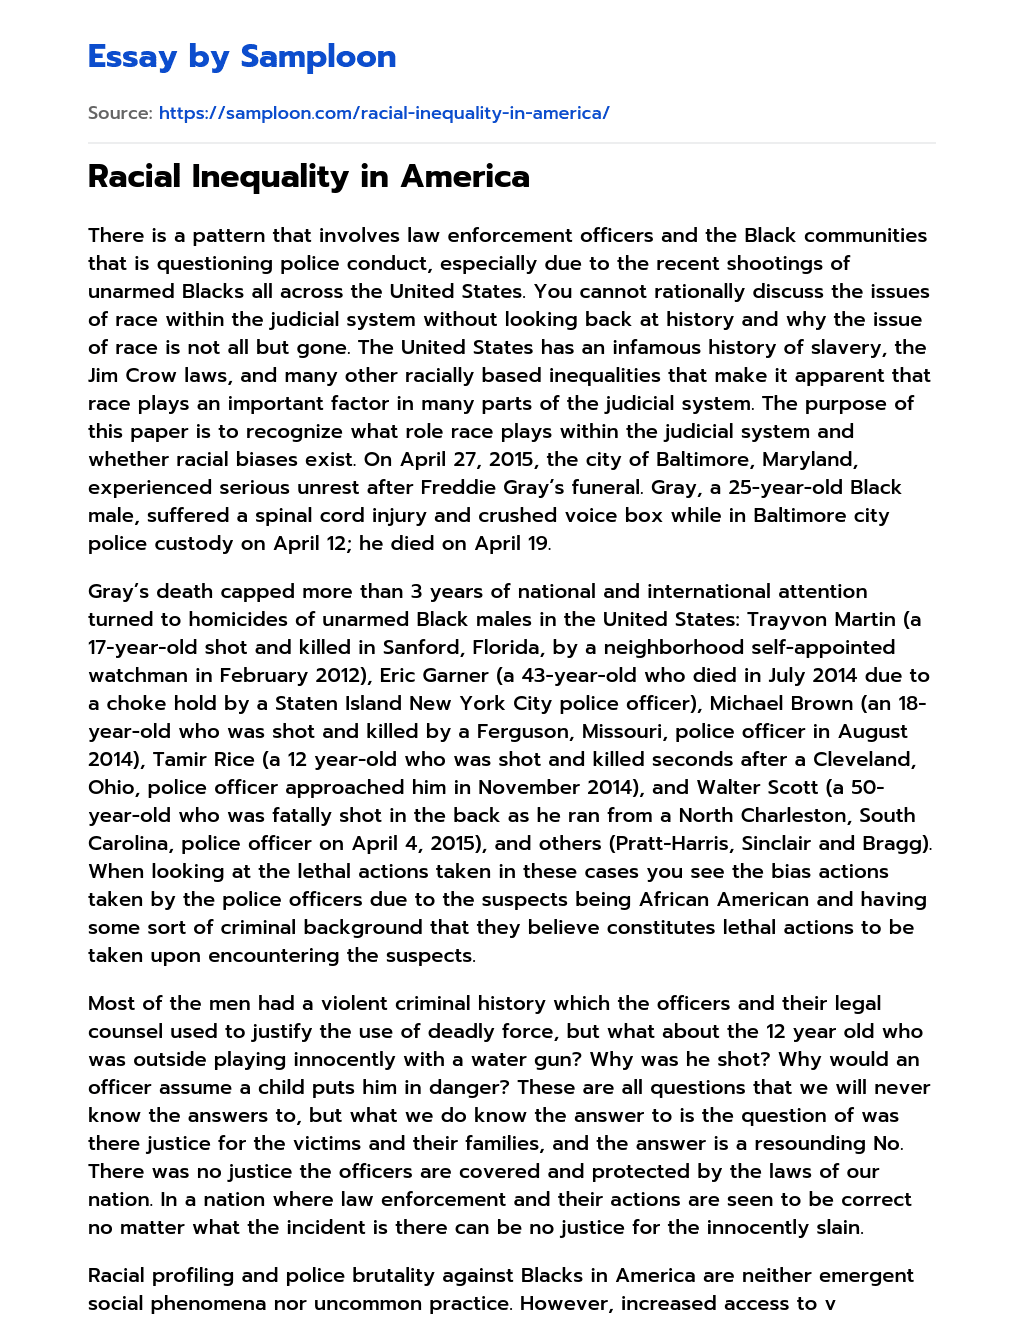 critical essay on racial inequality